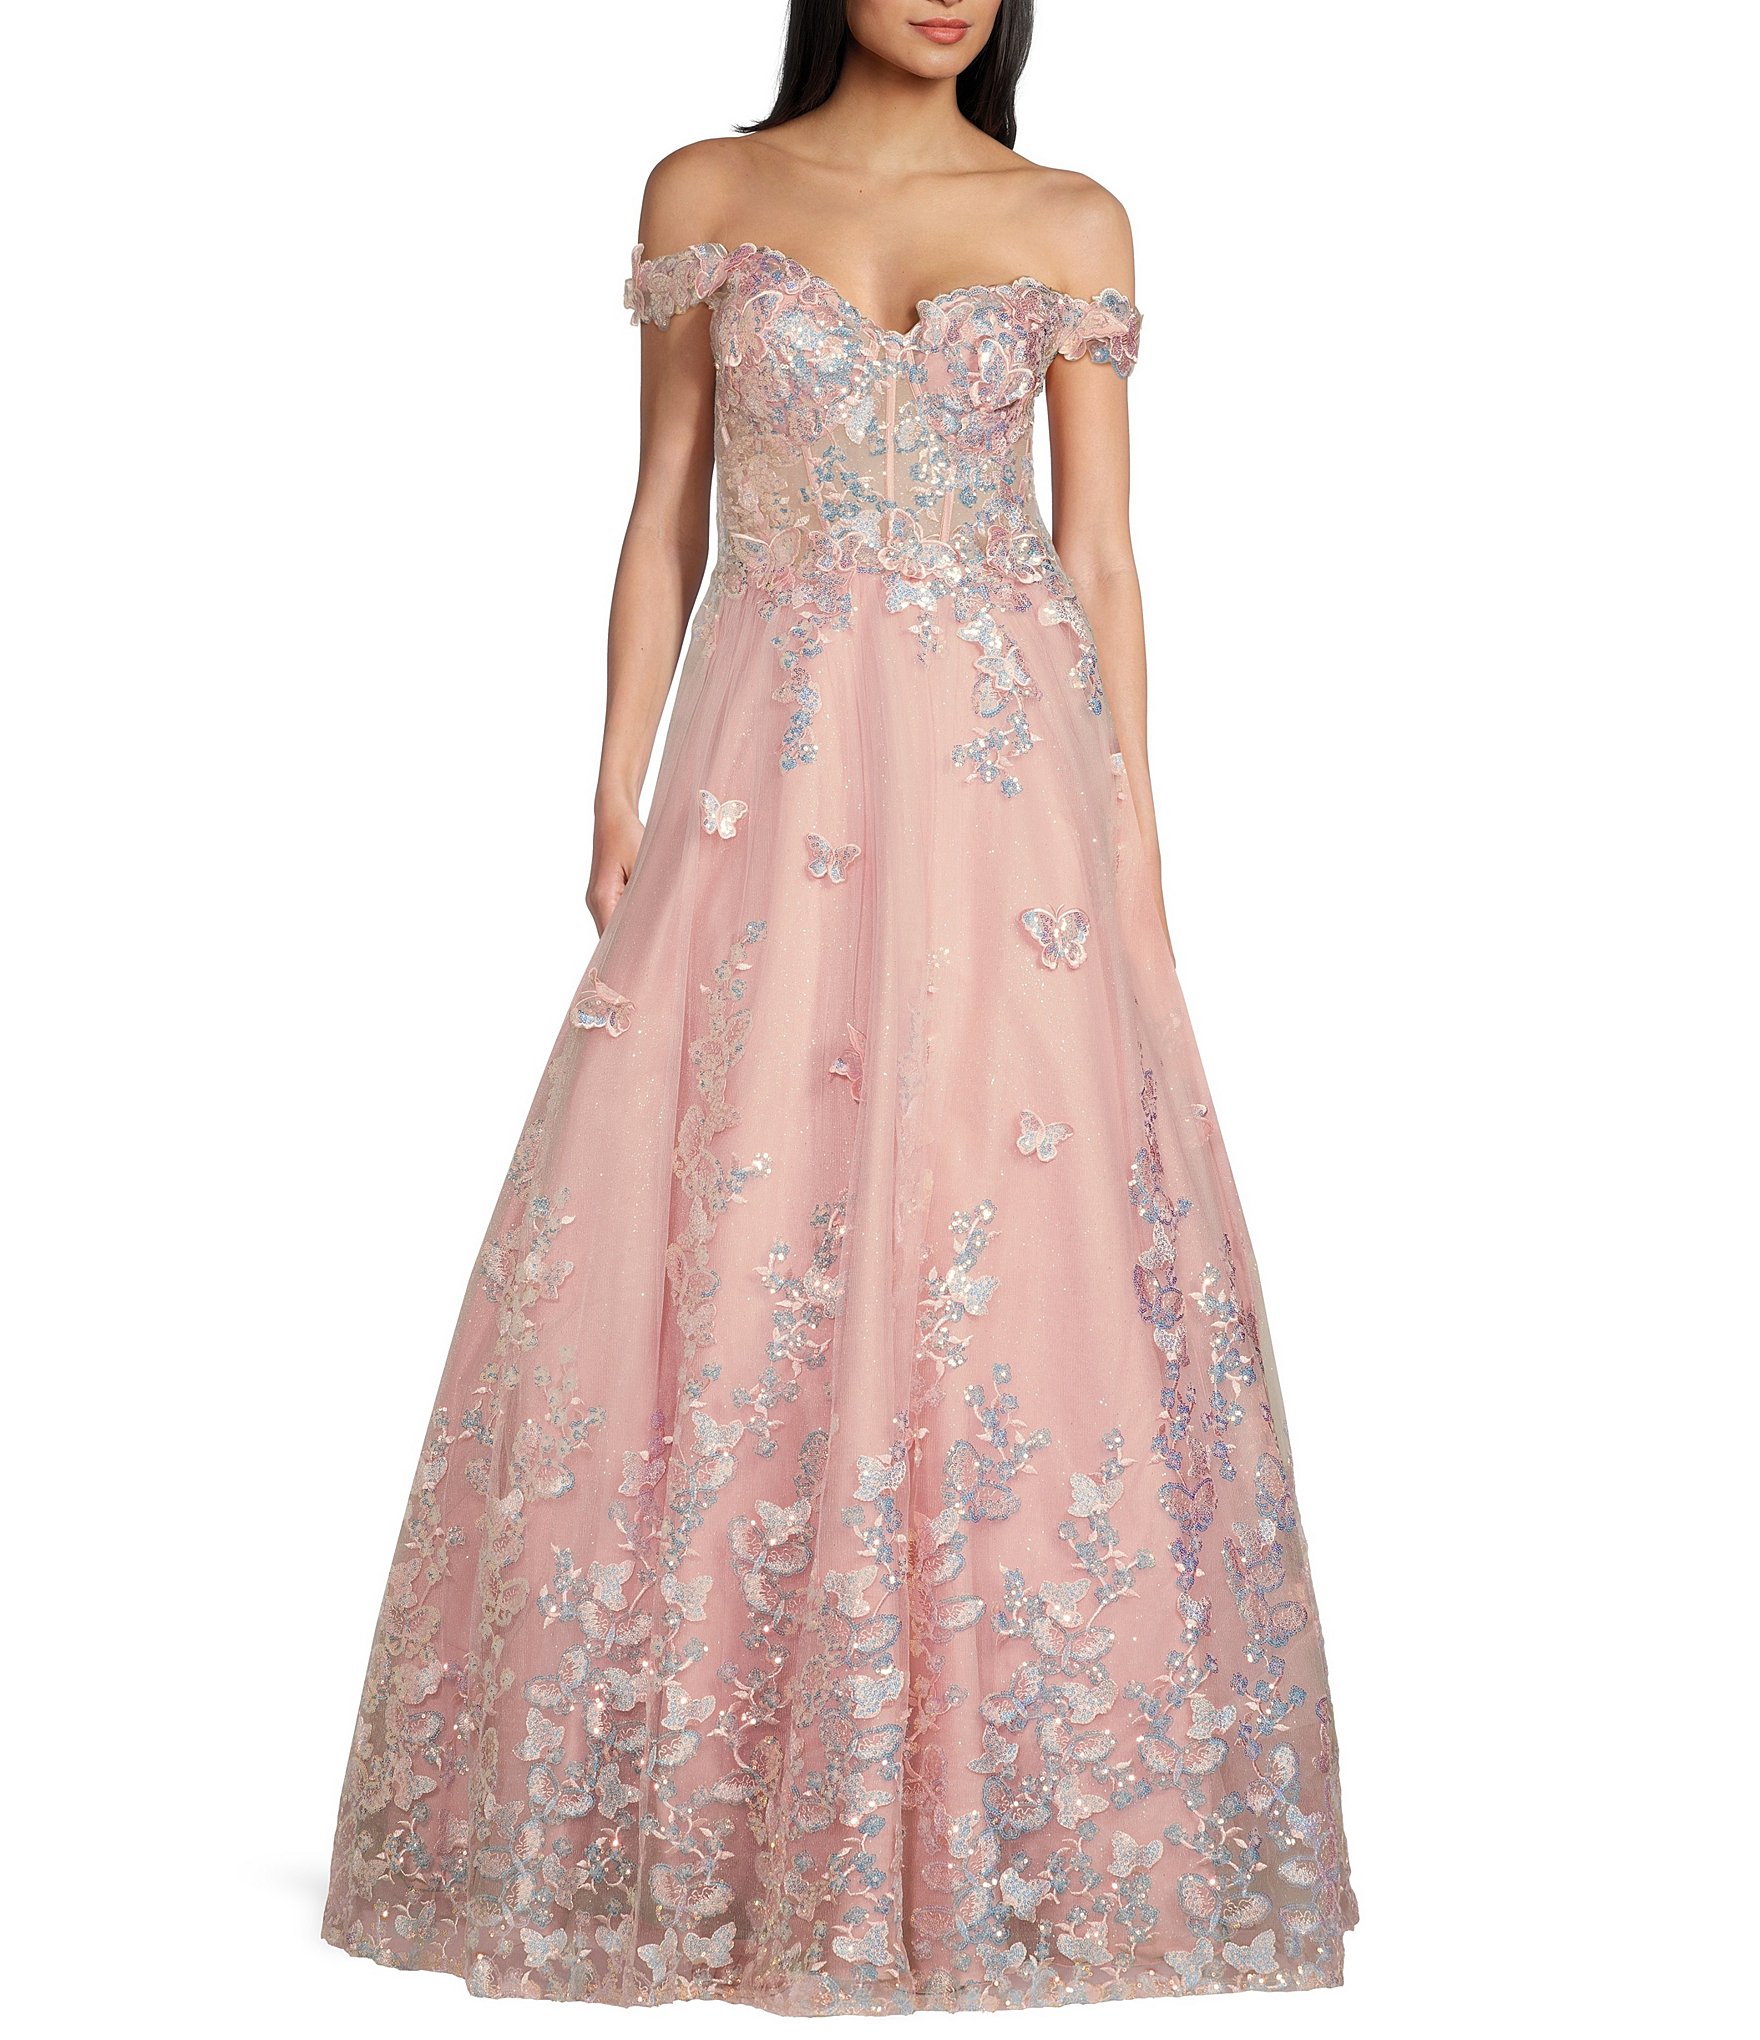 blush pink: Women's Formal Dresses & Evening Gowns